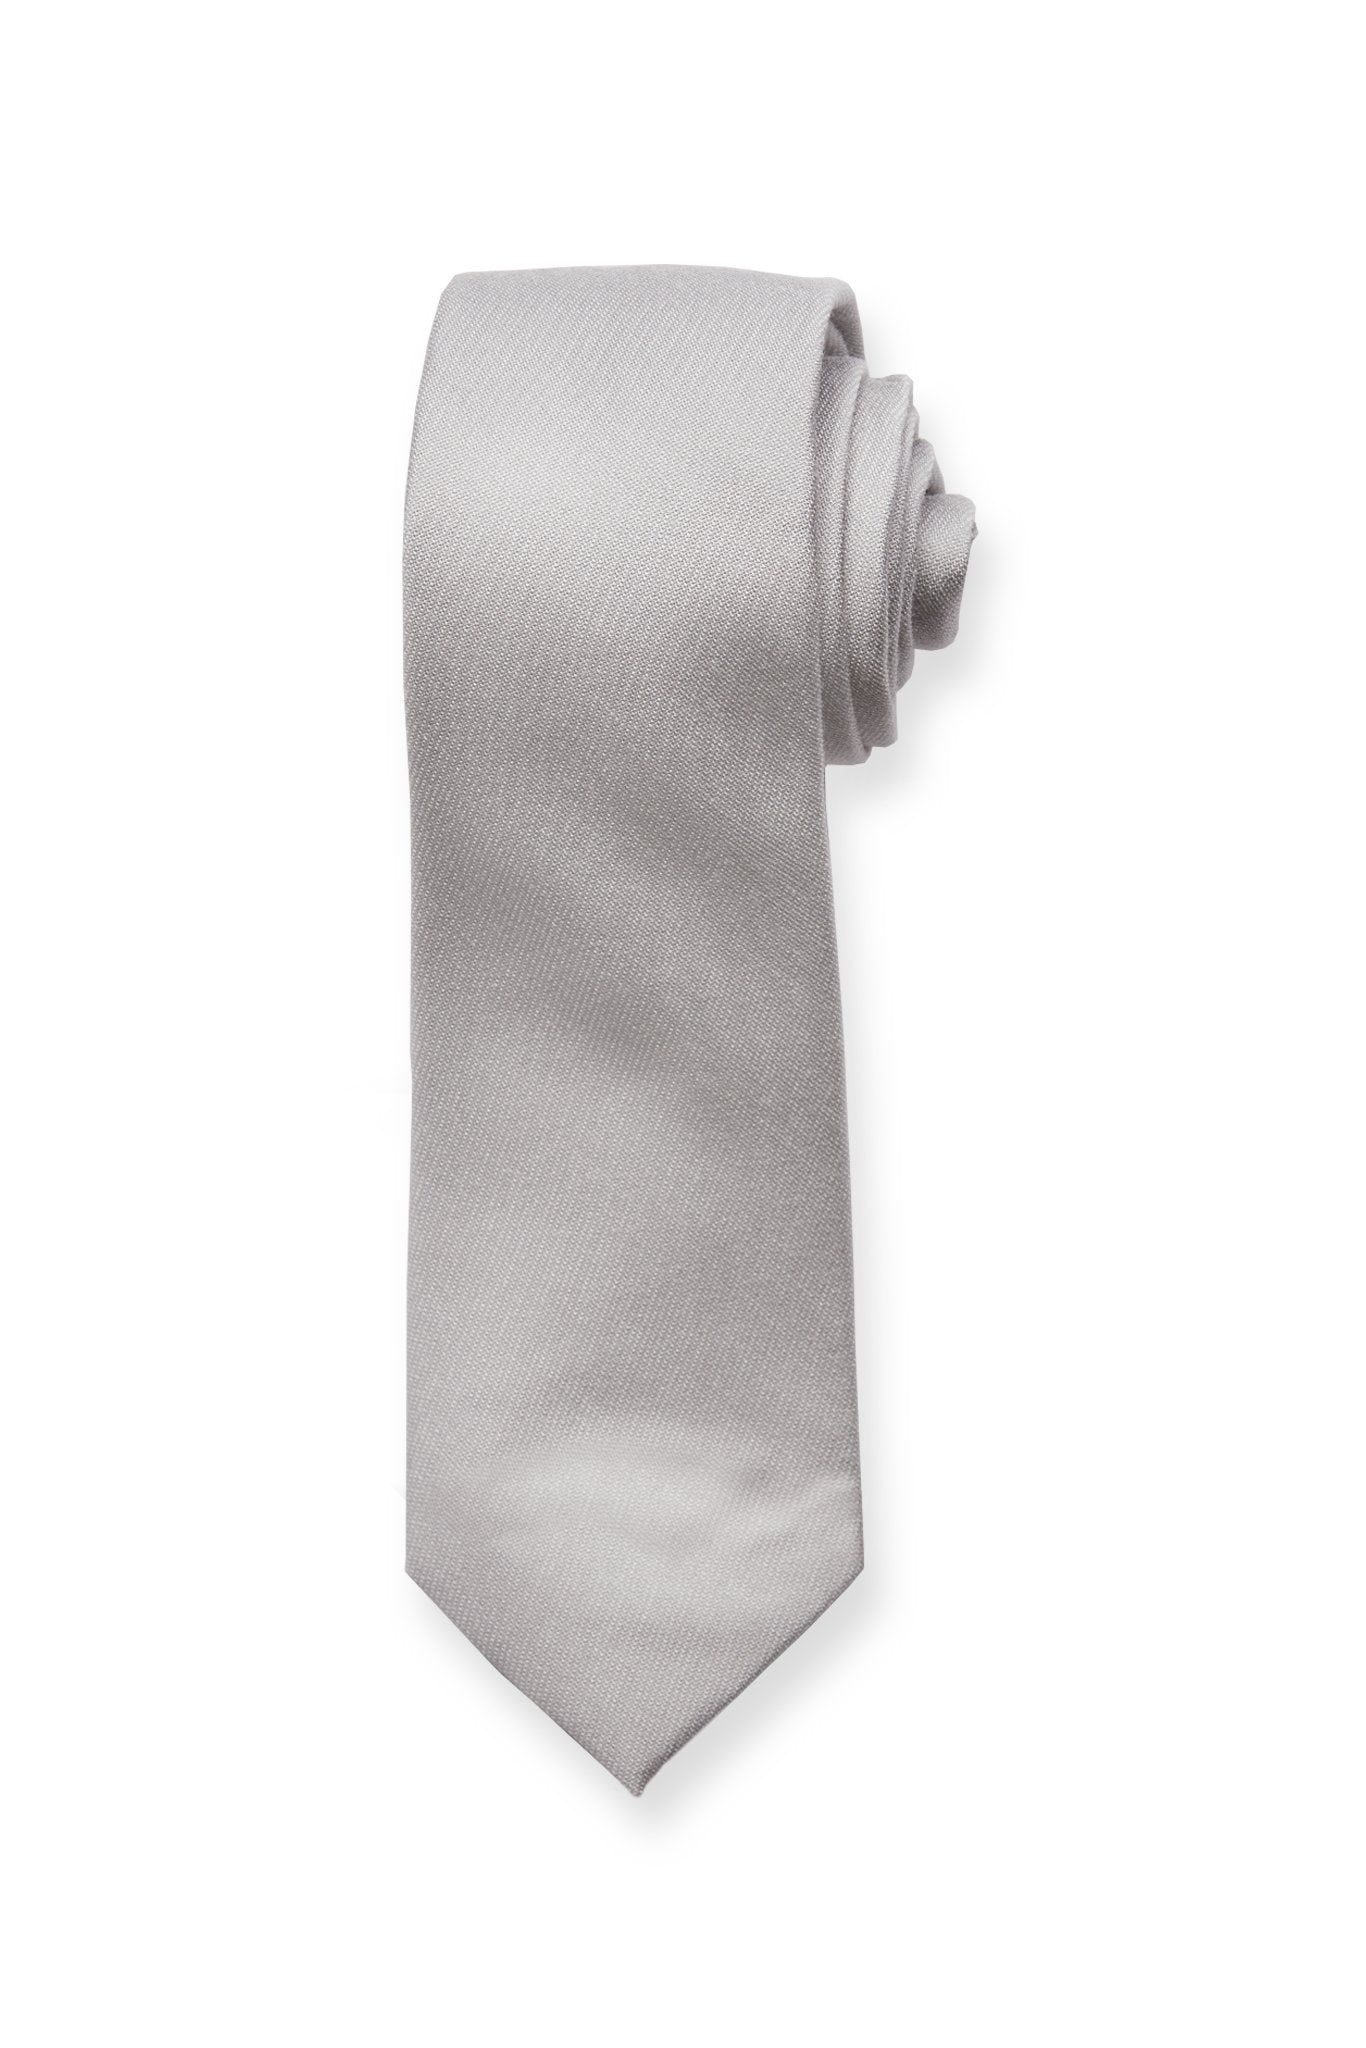 Simon Necktie in Dove Gray by Birdy Grey, front view